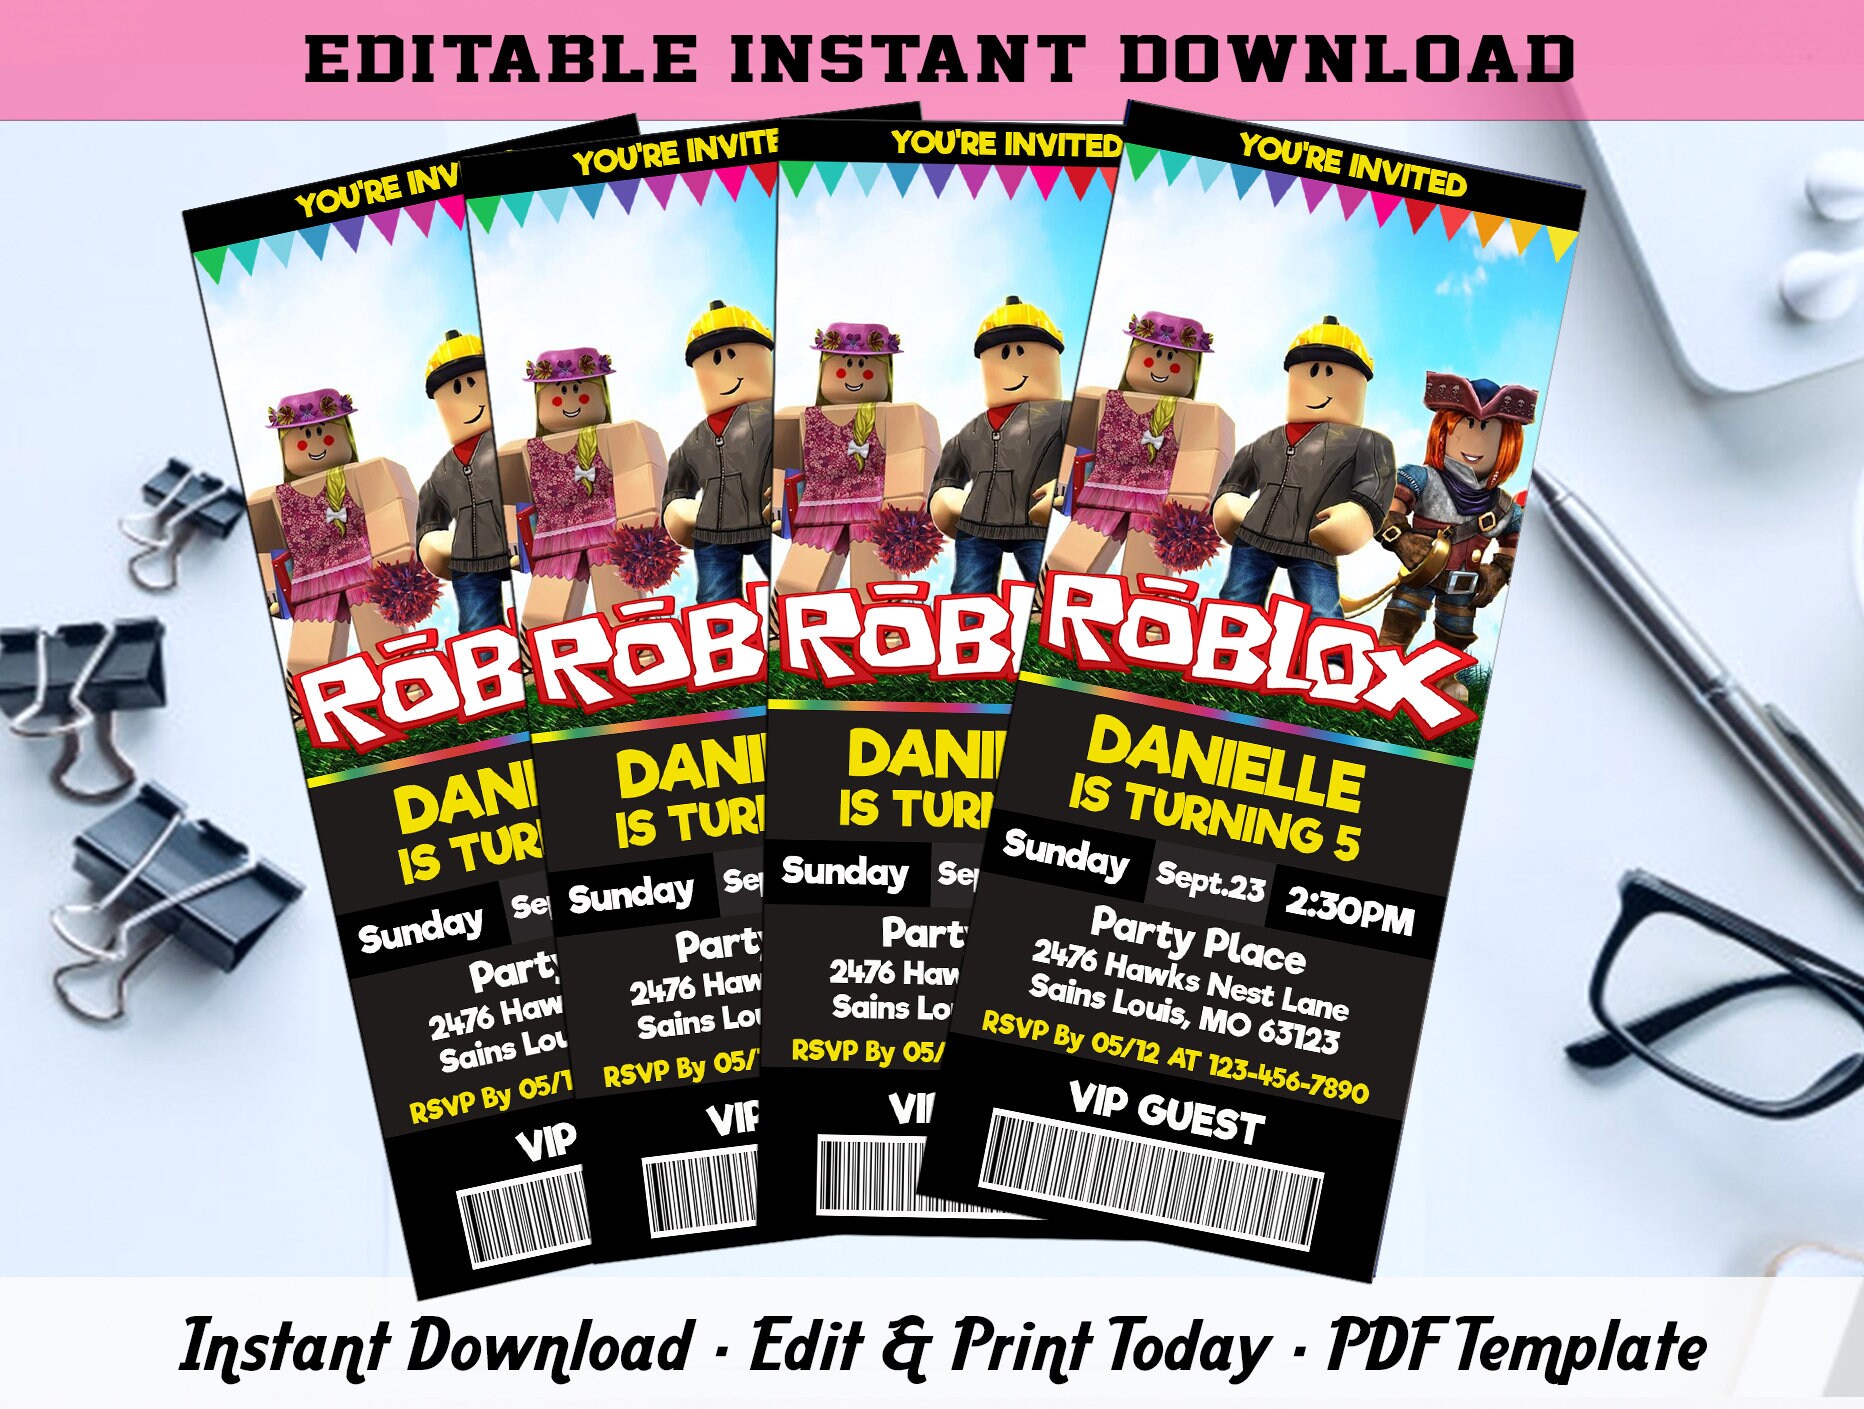 Aptoide Robux Tomwhite2010 Com - robux for roblox 1 0 download apk for android aptoide